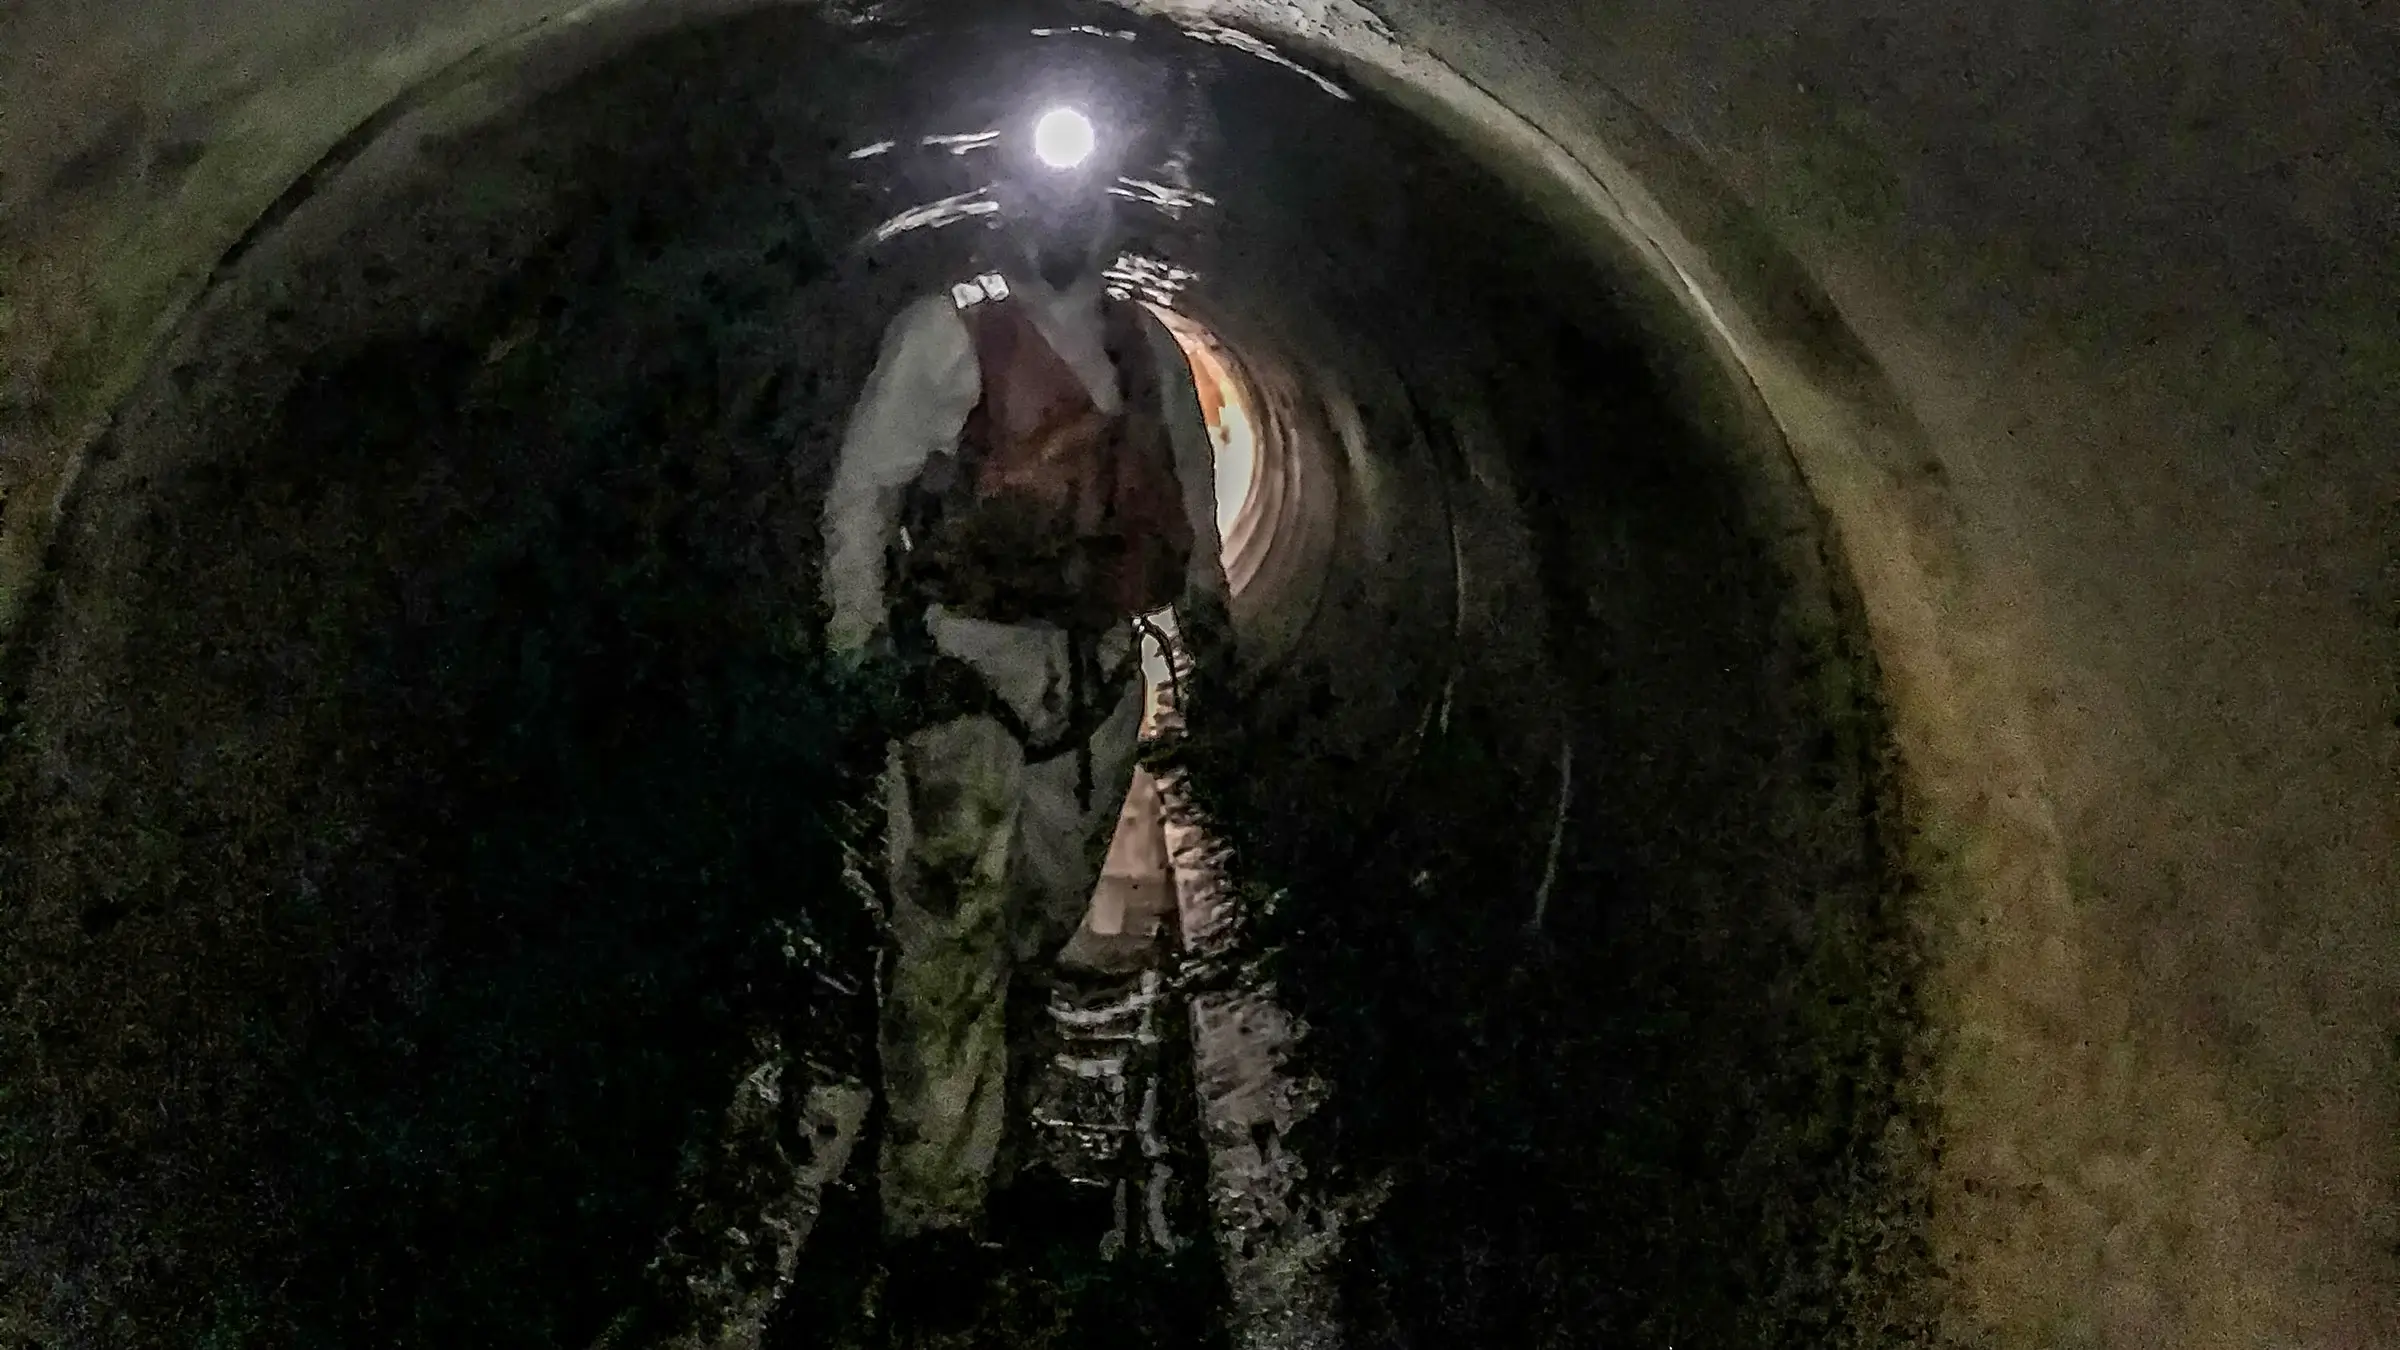 A crew member walks on the inside of an underground sewer tunnel